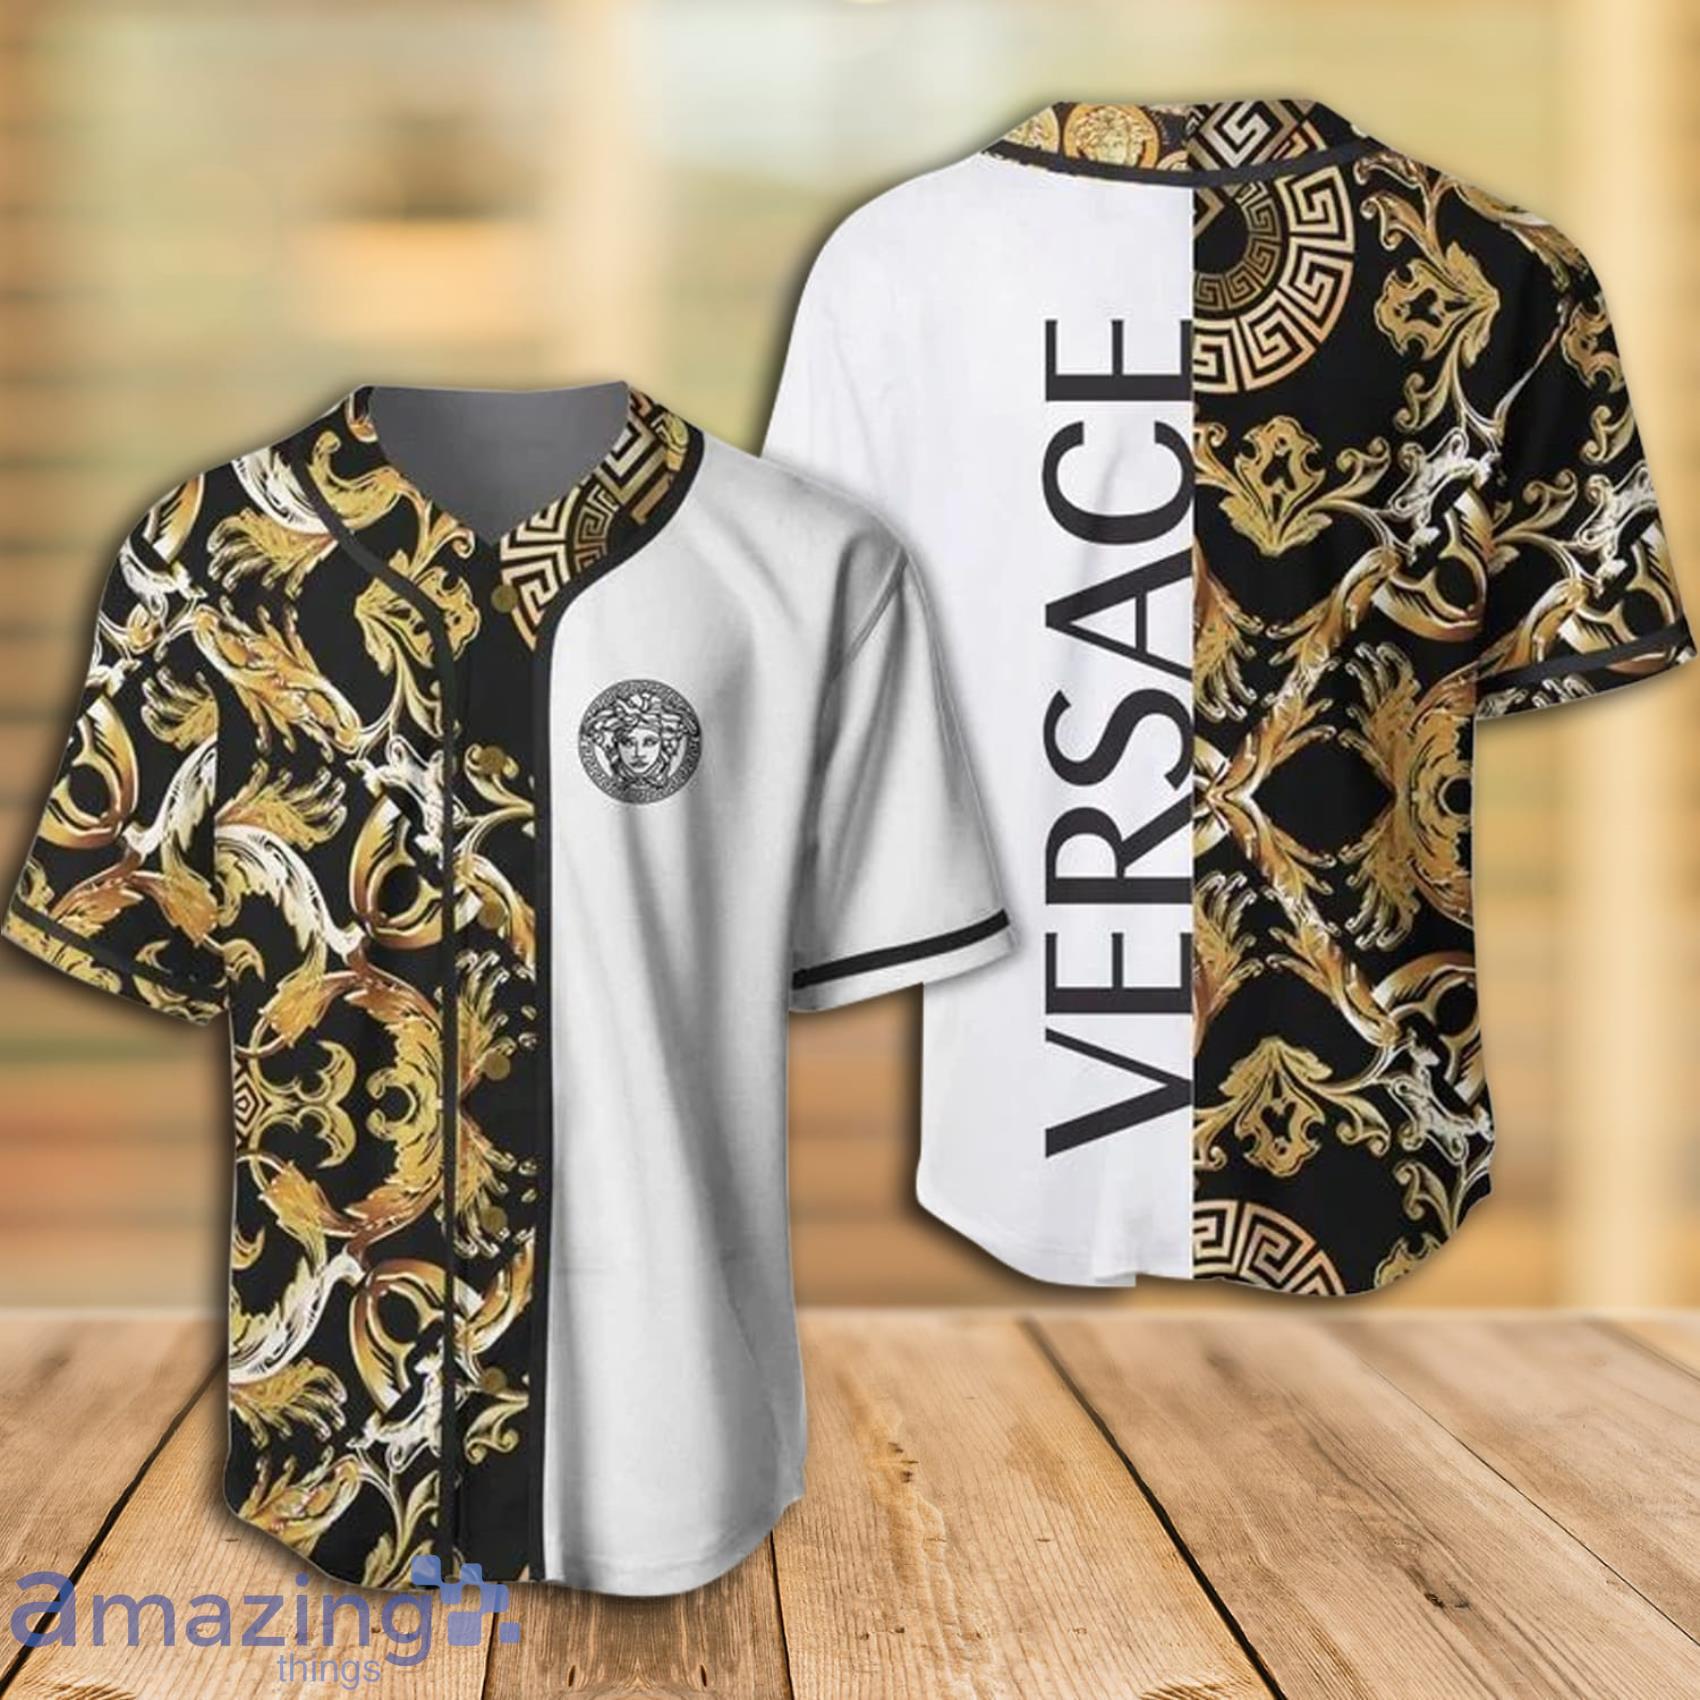 Gianni Versace White And Black Baseball Jersey Clothes Sport For Men Women